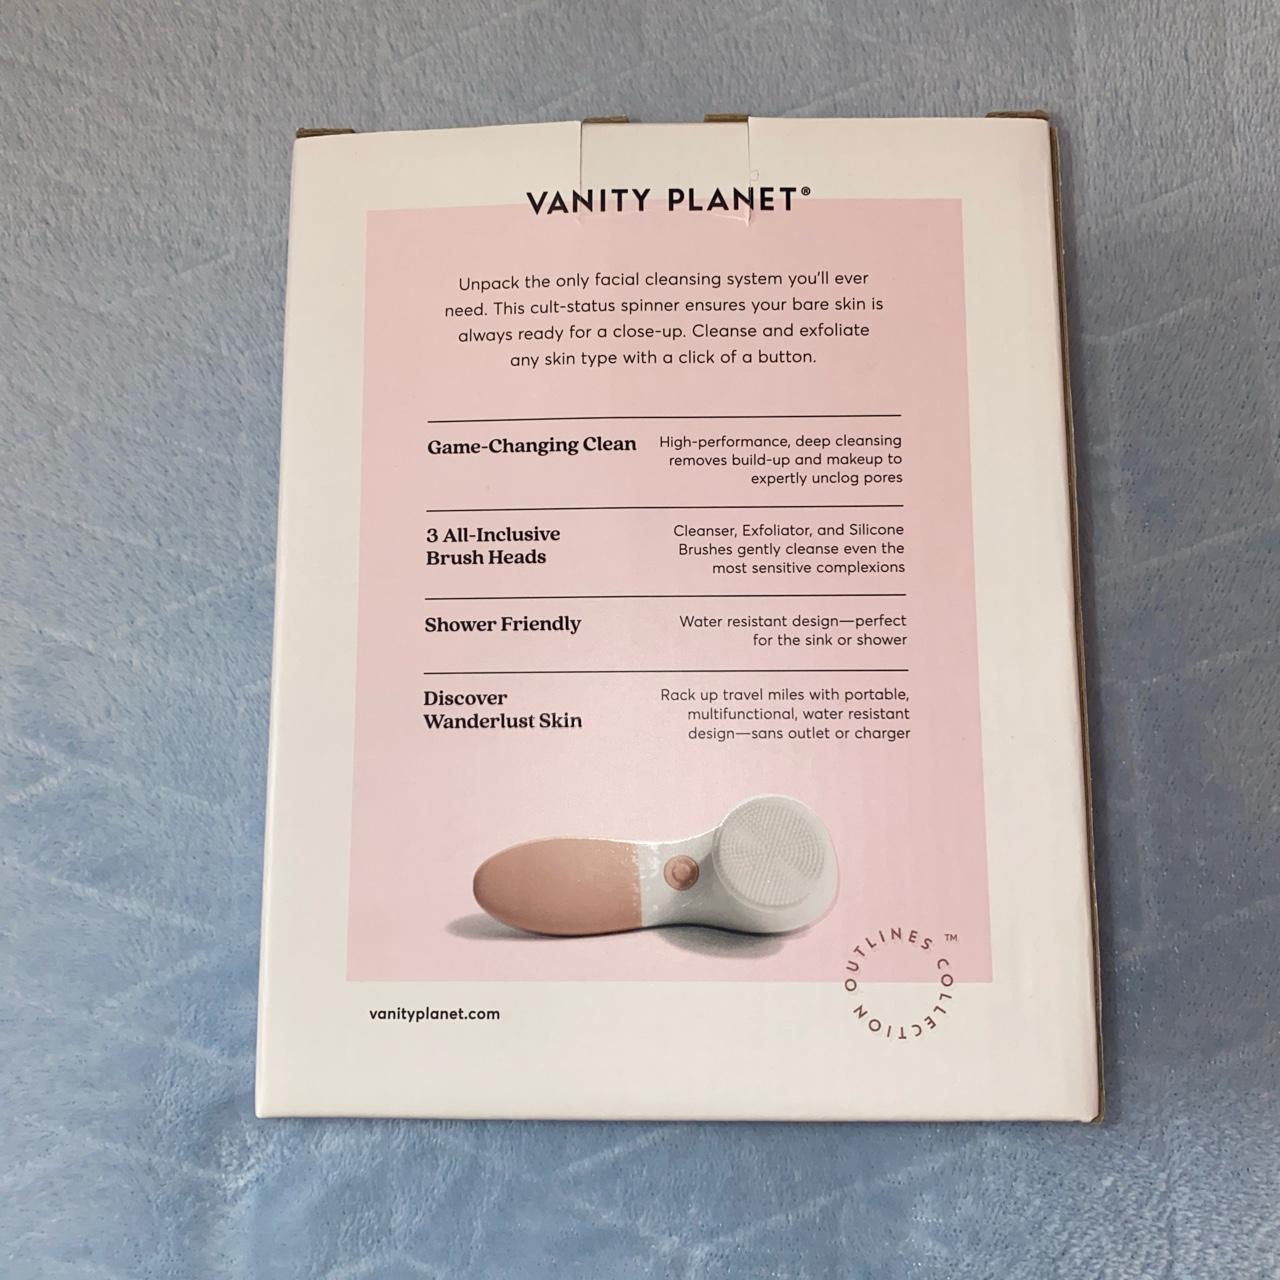 Product Image 2 - Brand new and unopened vanity